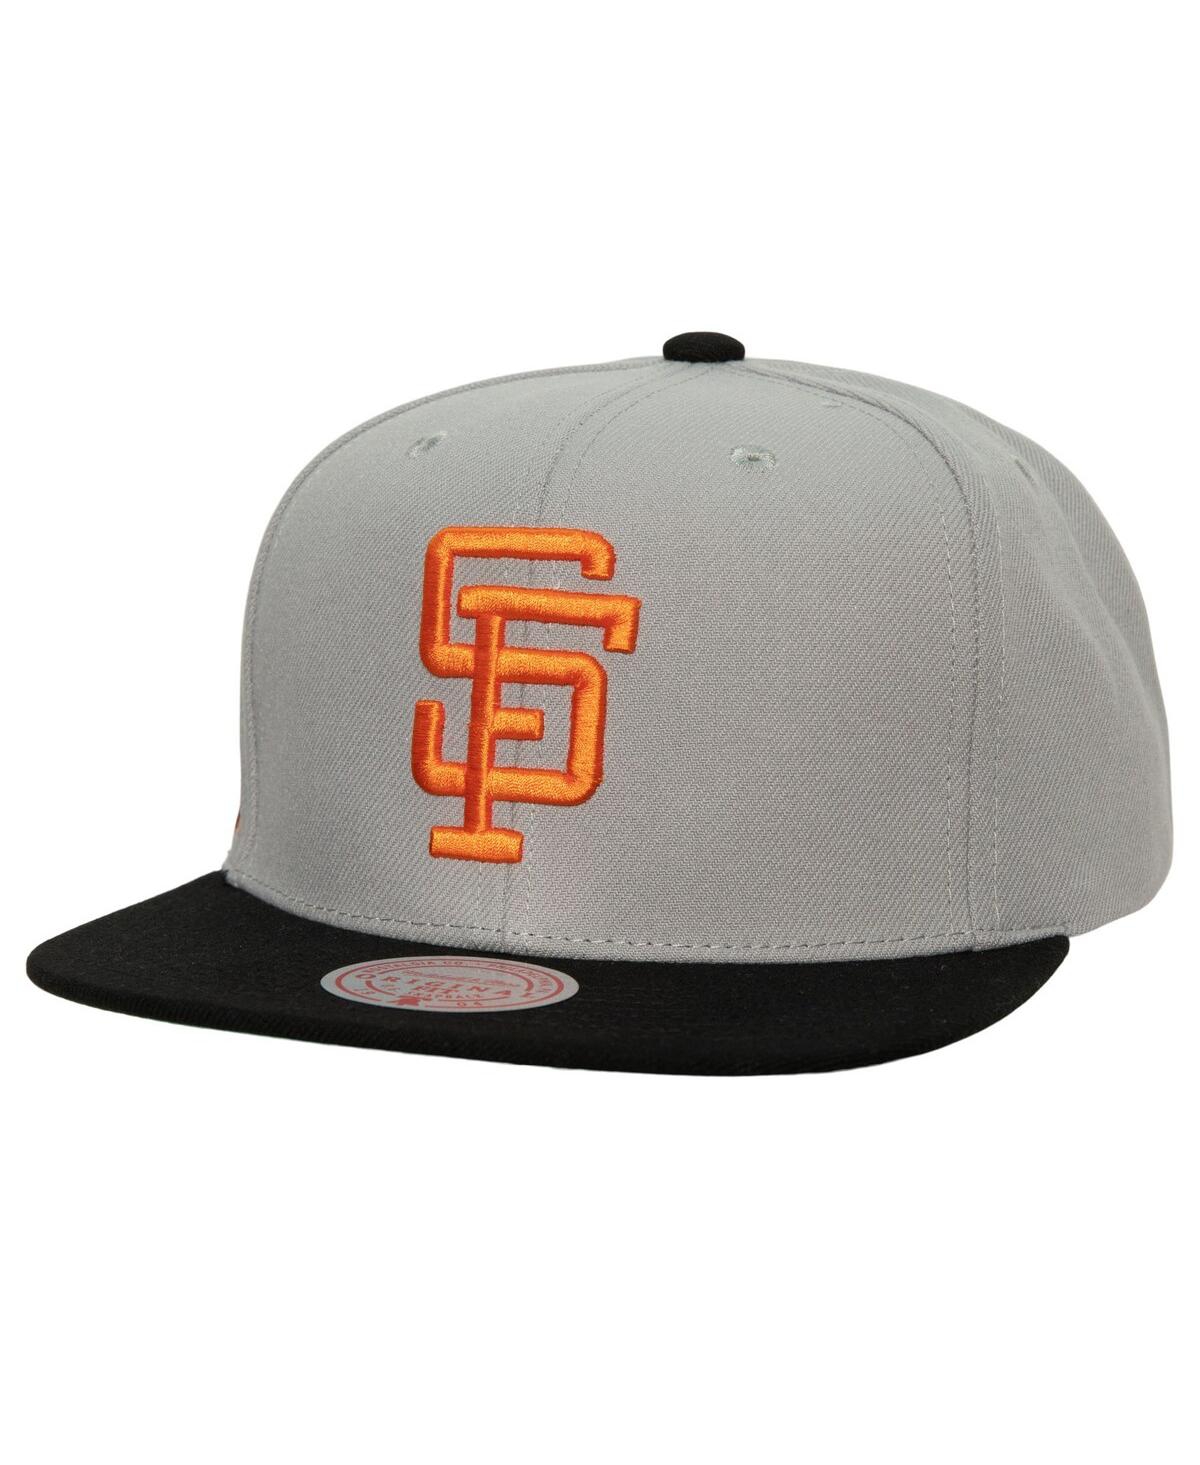 Mitchell & Ness Men's  Gray San Francisco Giants Cooperstown Collection Away Snapback Hat